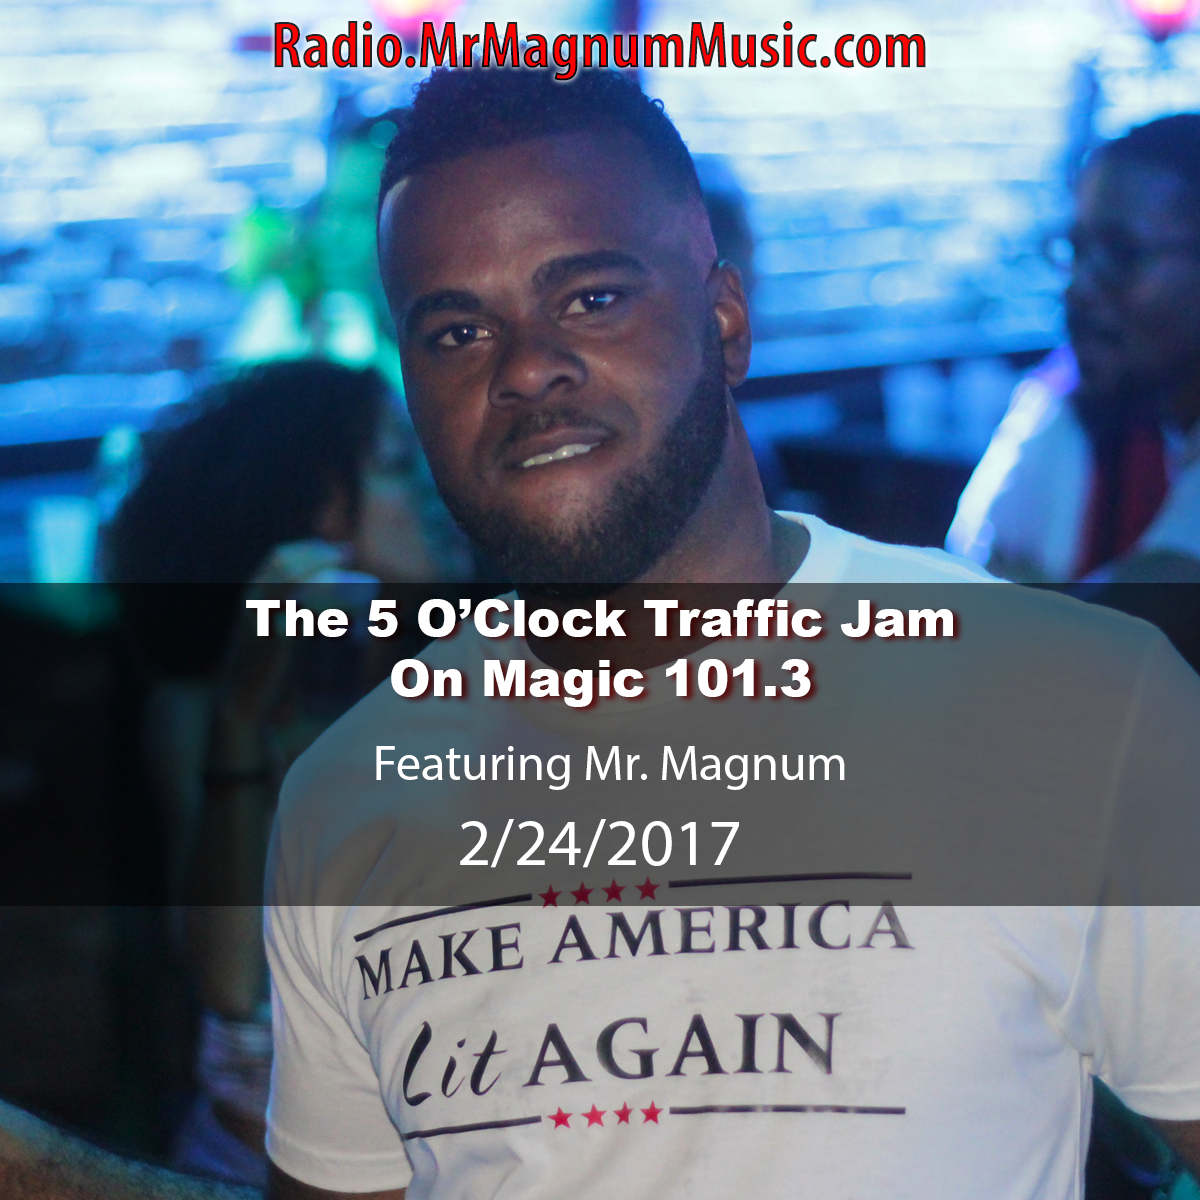 Mr. Magnum hops on the turntables at 5pm to help make the drive home a little bit easier. Tune in Monday through Friday to Magic 101.3 (Gainesville’s #1 for Hits and Hip Hop) or log on to http://Radio.MrMagnumMusic.com Featuring Chris Brown - Party Big Sean - Bounce Back Bruno Mars - Thats What I Like Travis Scott - Goosbumps DJ Khaled x Jay-Z x Beyoncé - Shining Kehlani - Distraction Post Malone - Congratulation